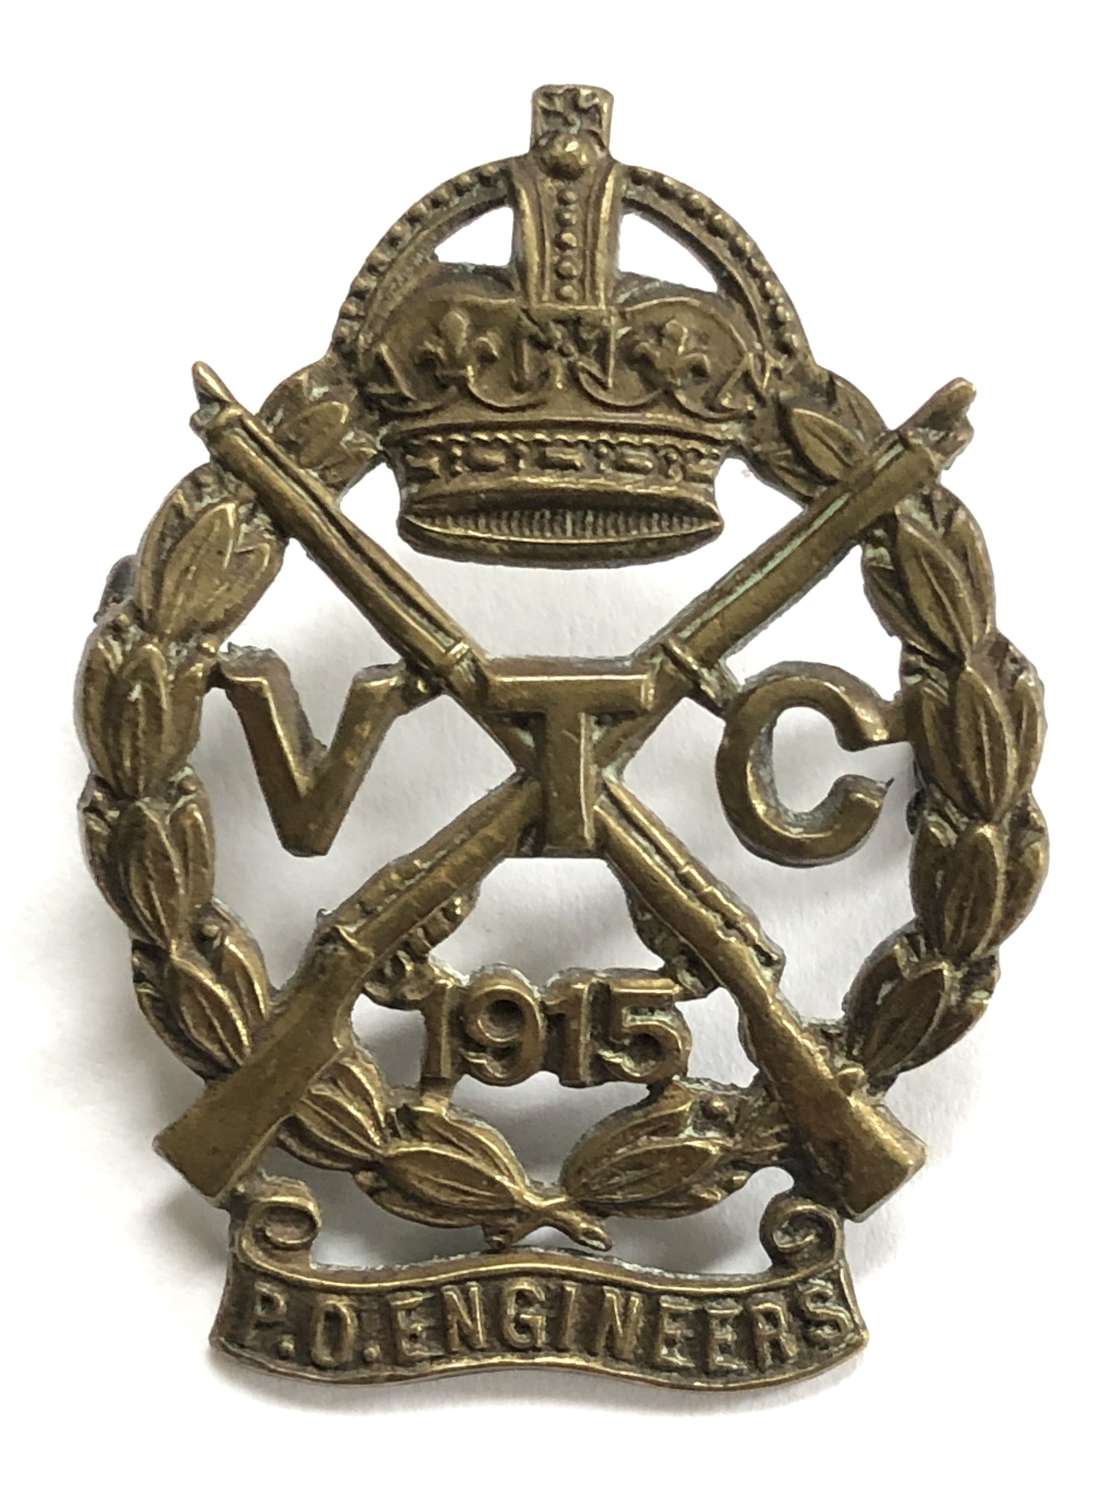 Post Office Engineers 1915 VTC cap badge by Gaunt